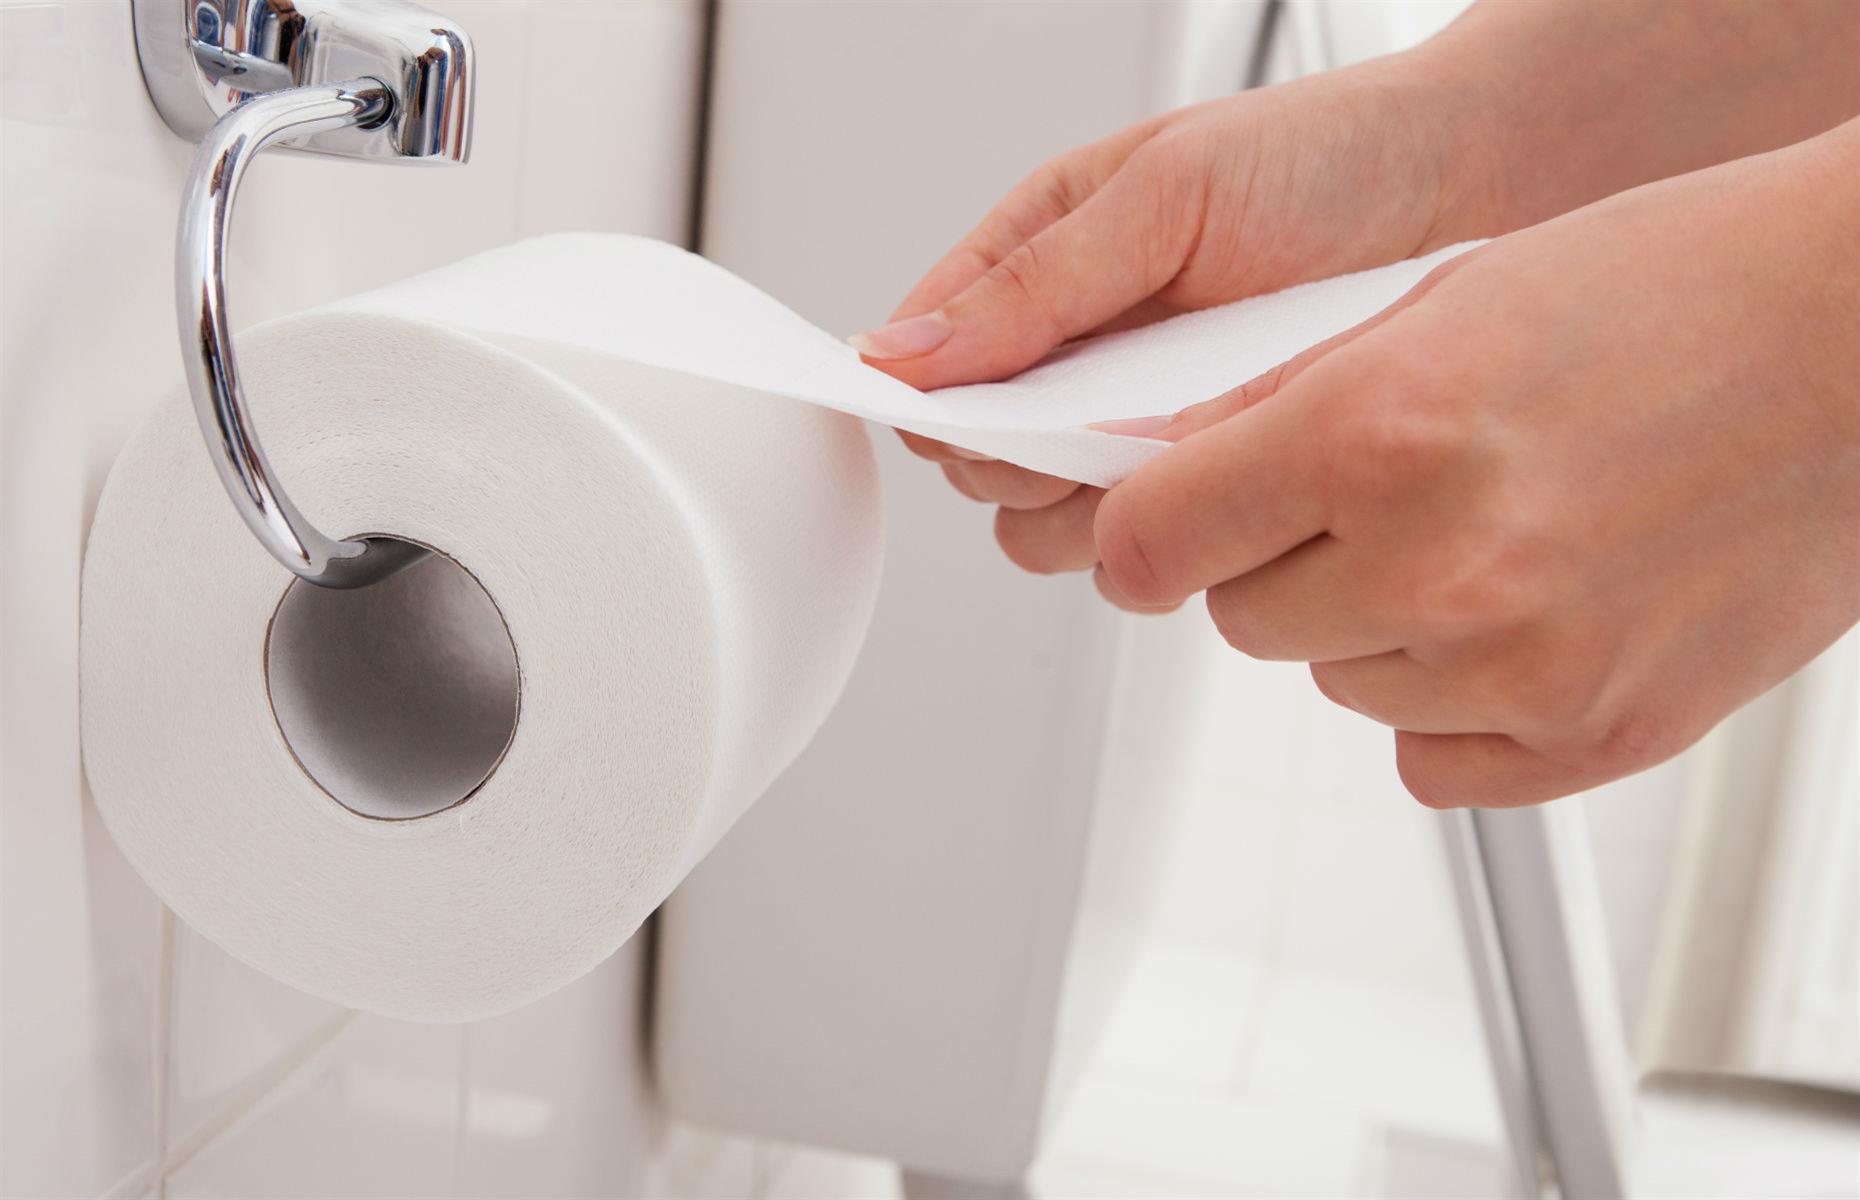 <p>Super handy when you're on the go on vacation, toilet paper is usually fine to take, as long as you don't go overboard. This goes for tissues from the dispenser too.</p>